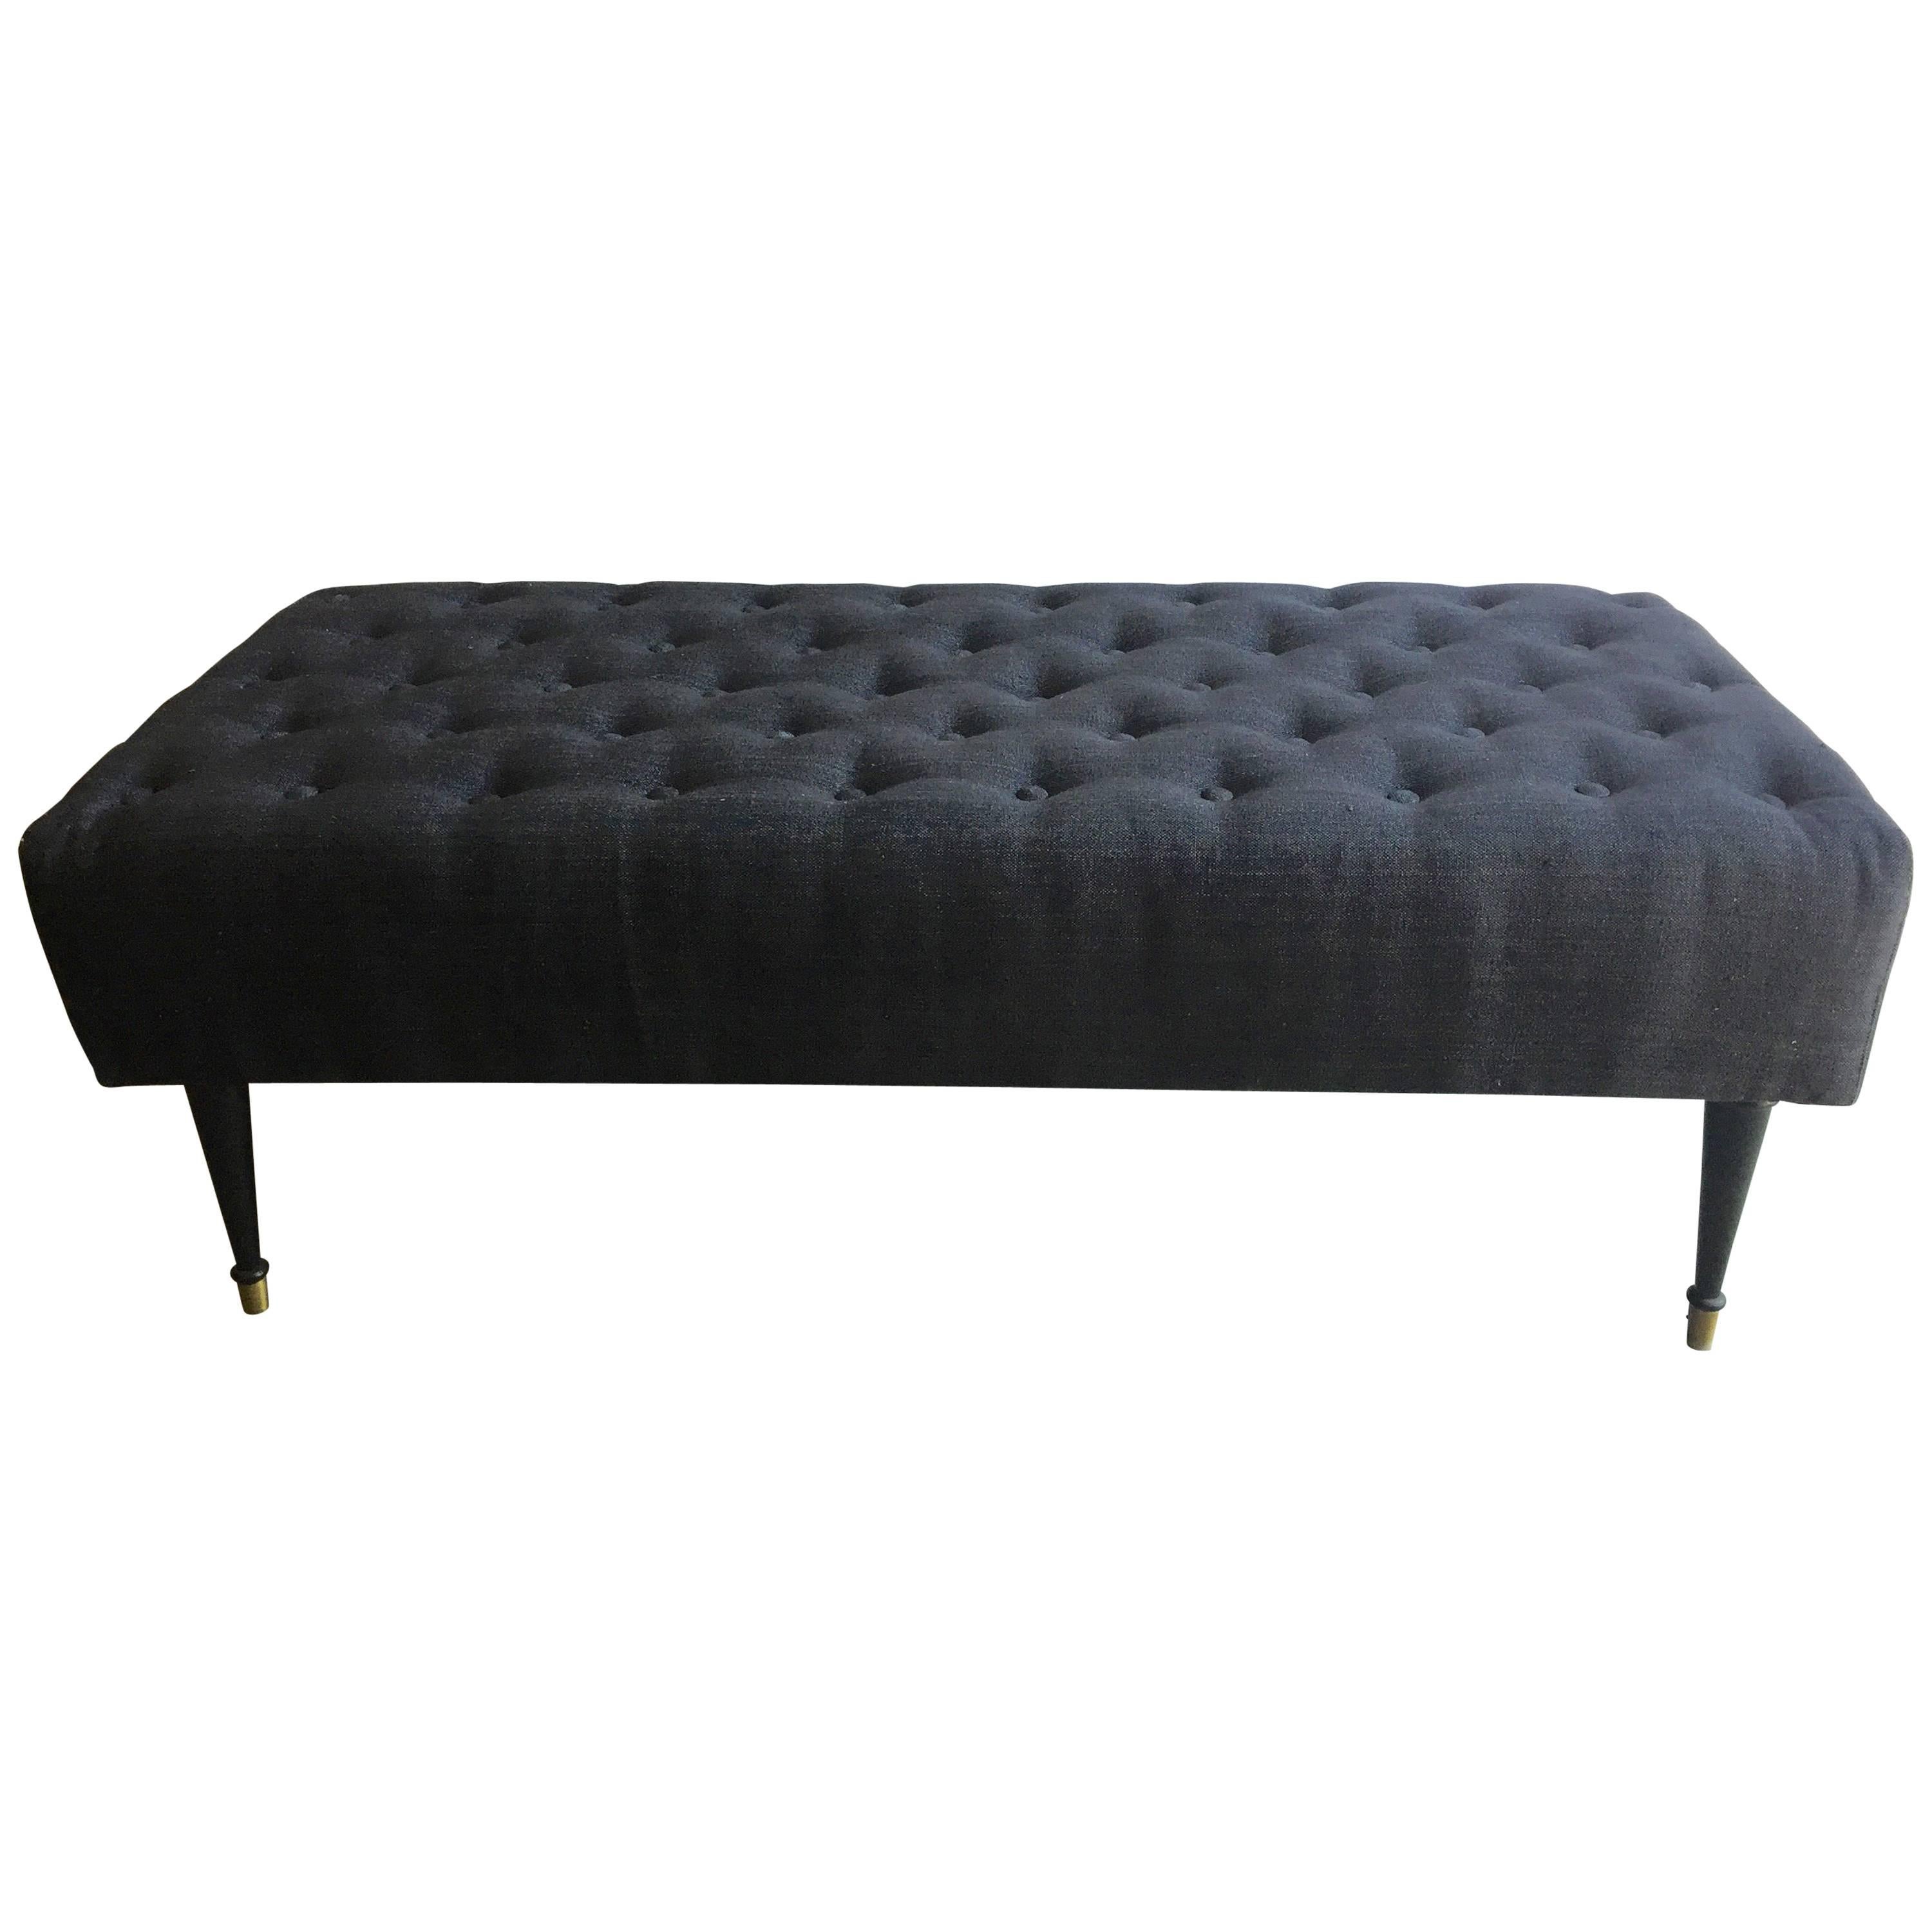 Handsome Tufted Upholstered Bench Coffee Table